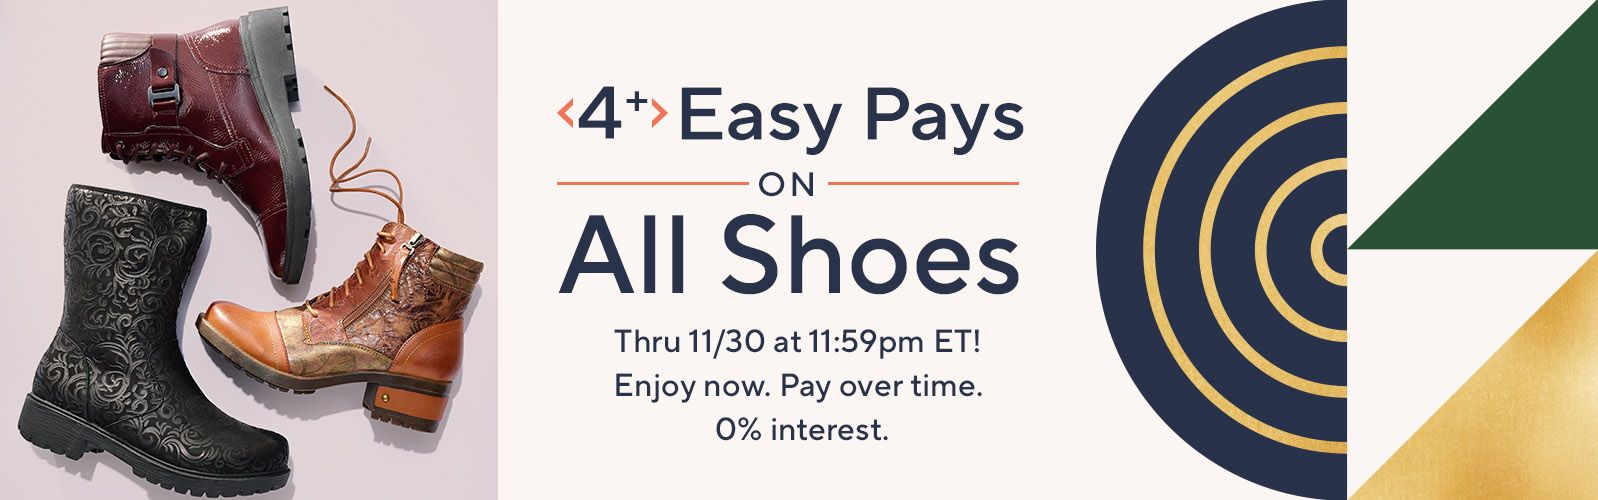 4+ Easy Pays on All Shoes Thru 11/30 at 11:59pm ET! Enjoy now. Pay over time. 0% interest.